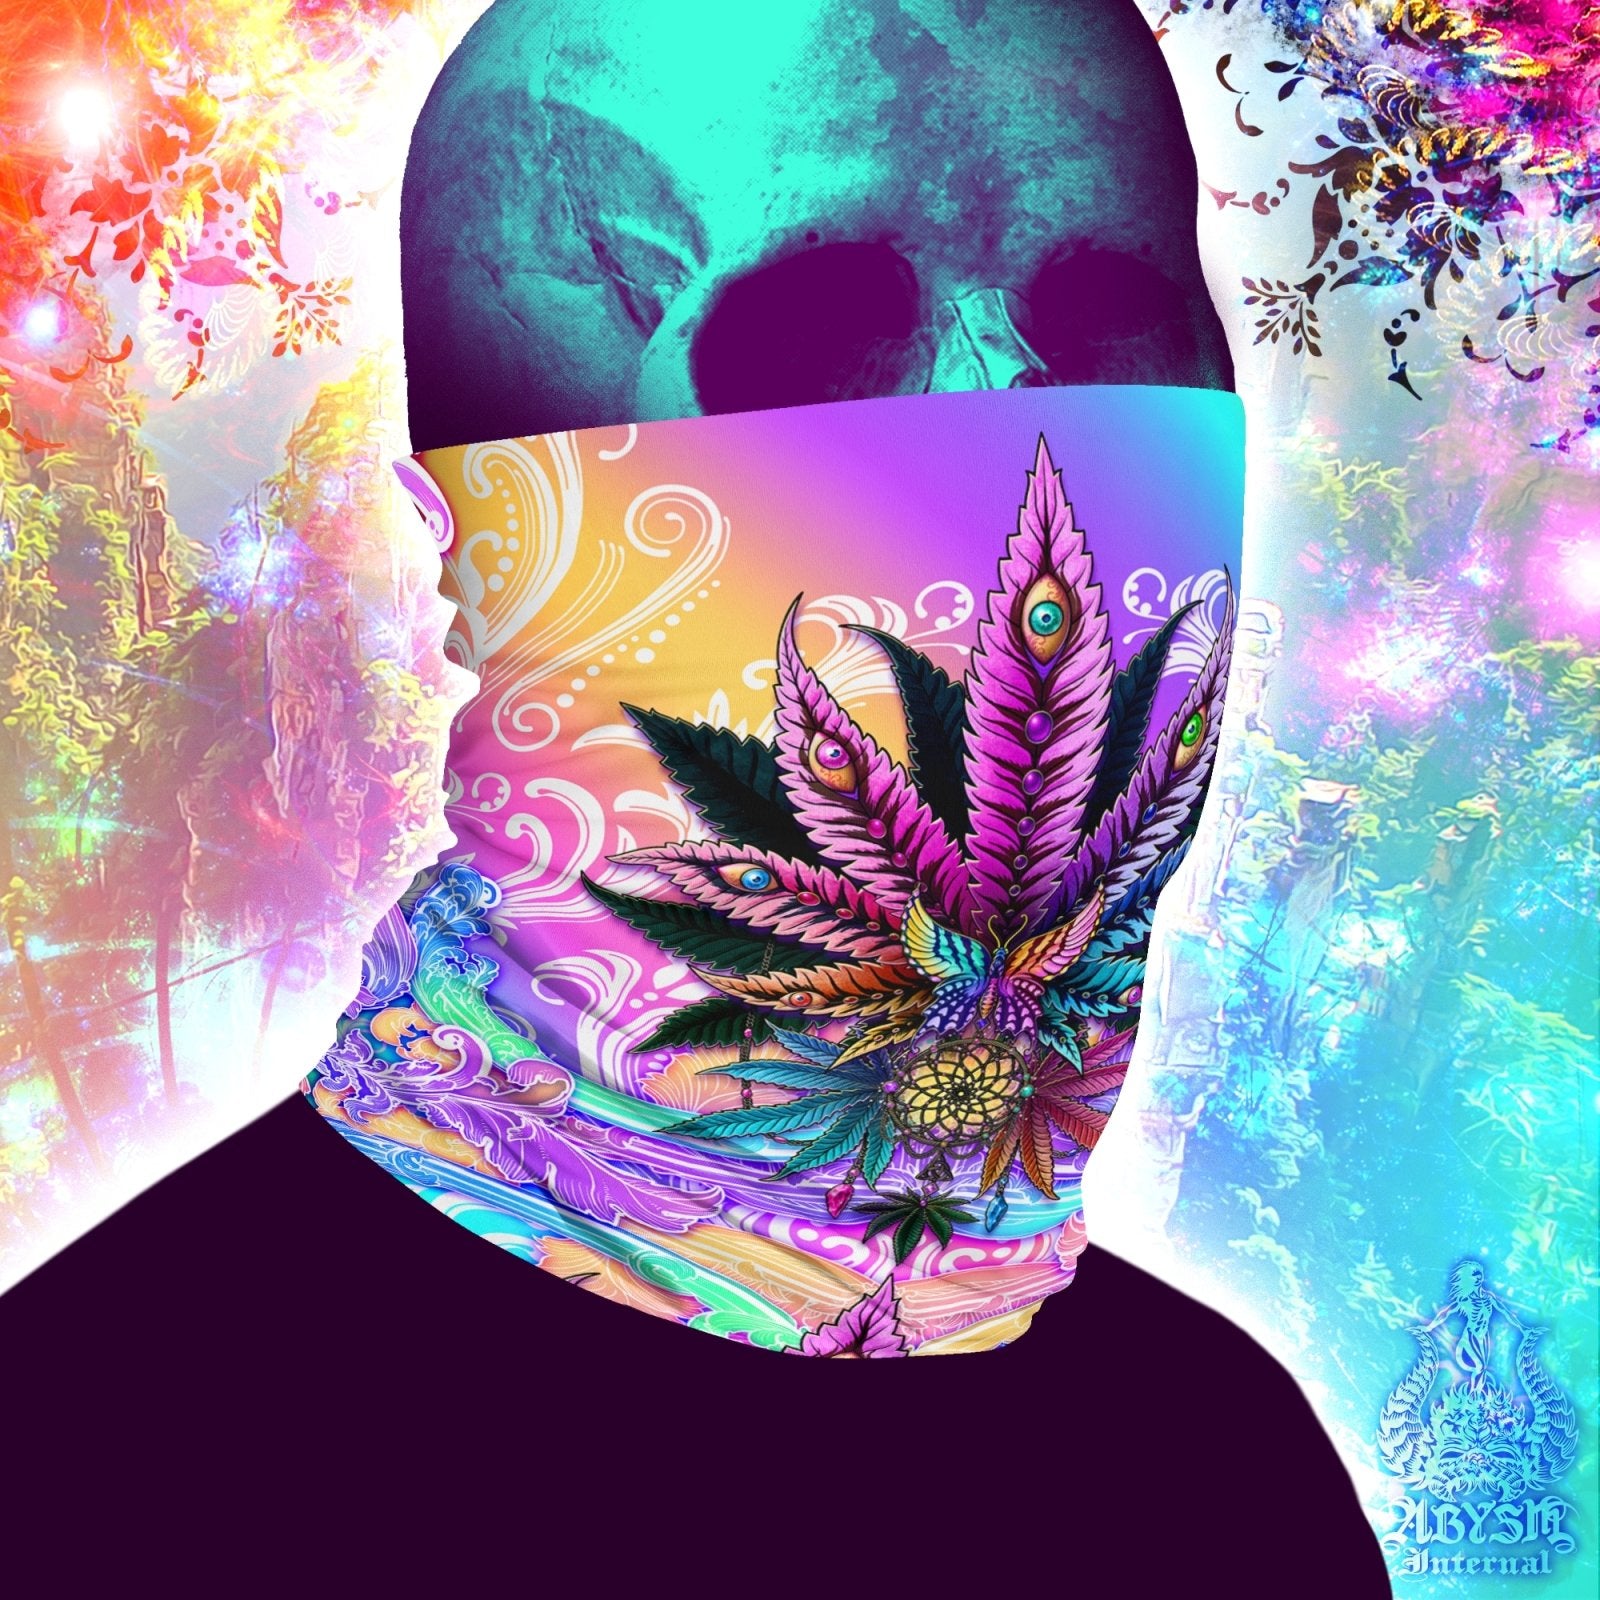 Cannabis Neck Gaiter, Weed Face Mask, Colorful Marijuana Head Covering, Psychedelic Festival Outfit, 420 Gift - Black - Abysm Internal